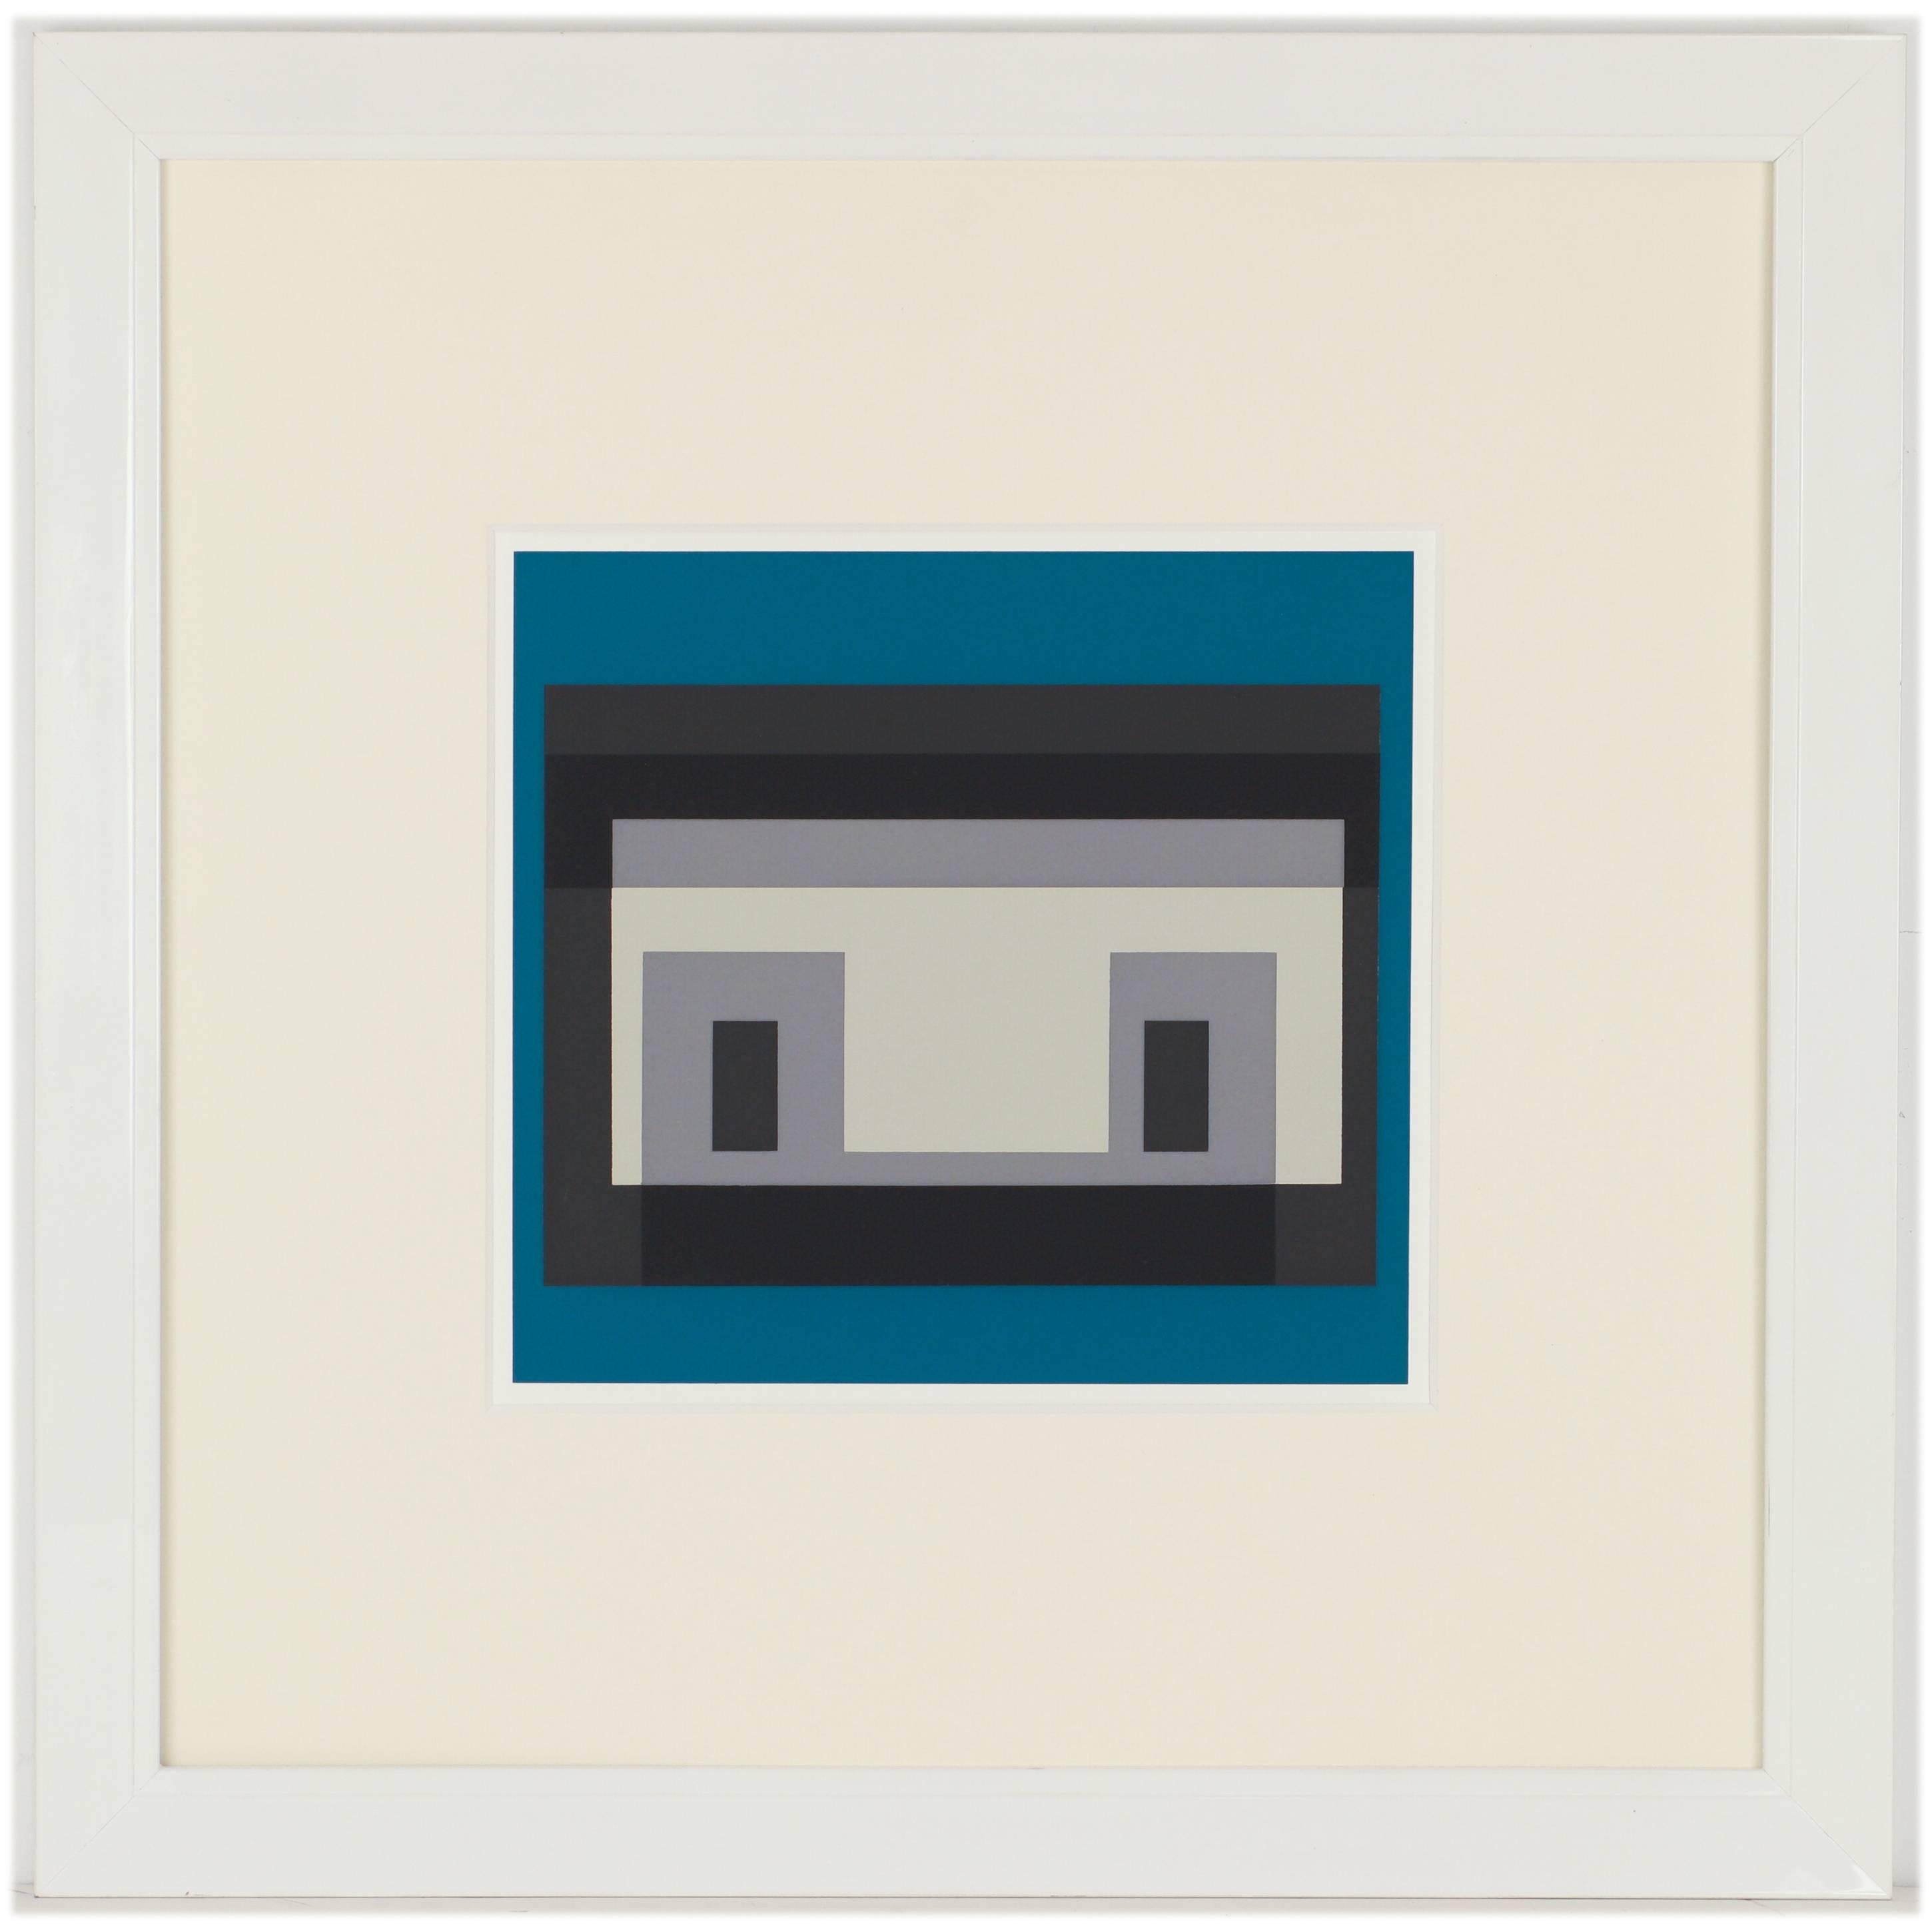 Josef Albers Abstract Print - Variant IV from Ten Variants 